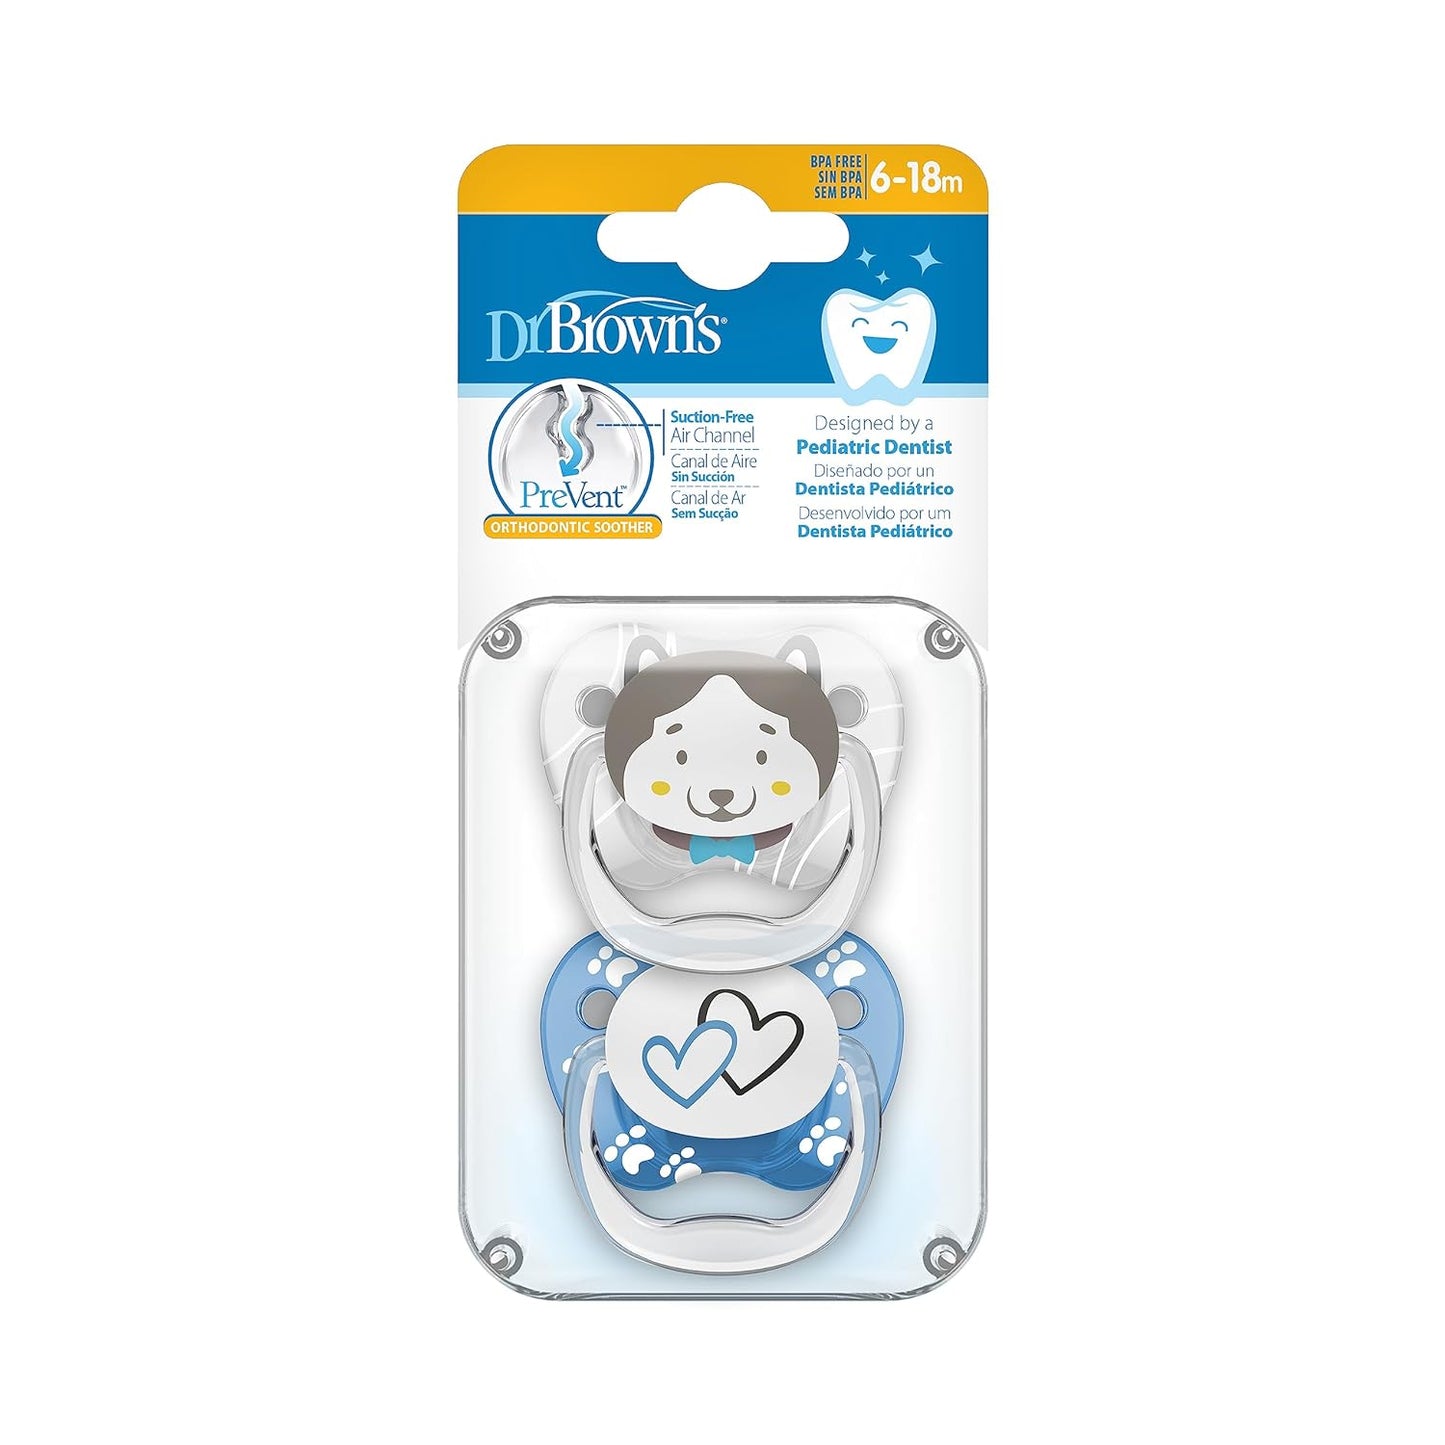 Dr. Brown's Prevent Stage 2 Glow In The Dark Butterfly Shield Pacifier Pack of 2 - Blue